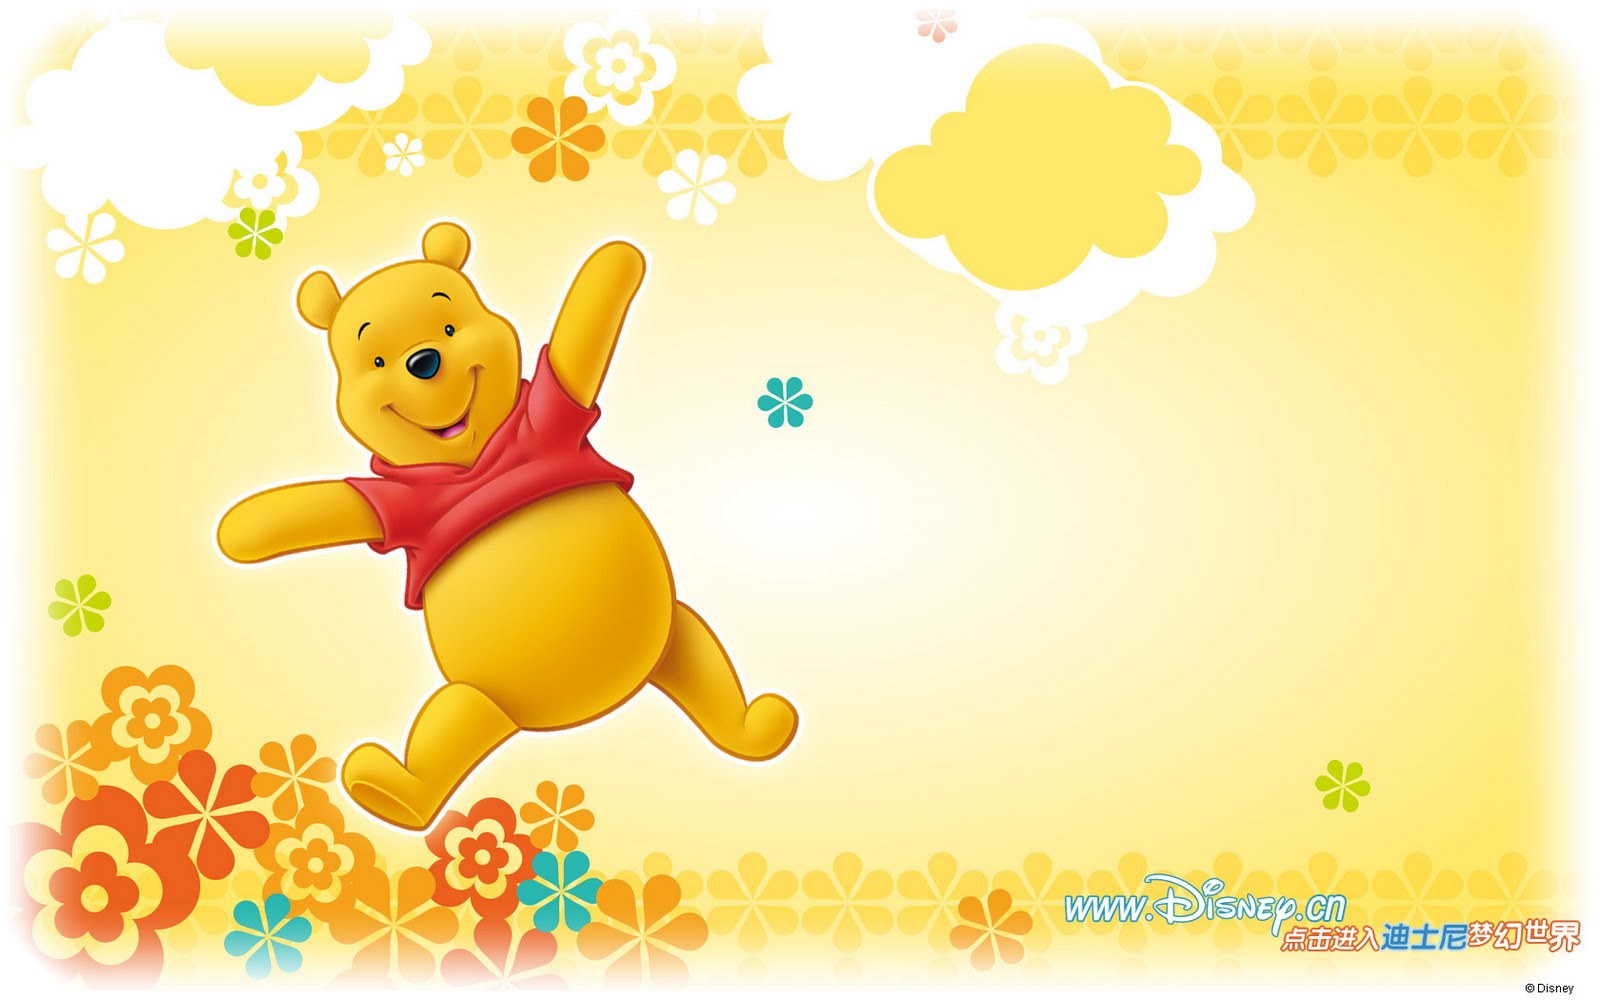 Winnie The Pooh Wallpaper 10 - Best Wallpaper Collection